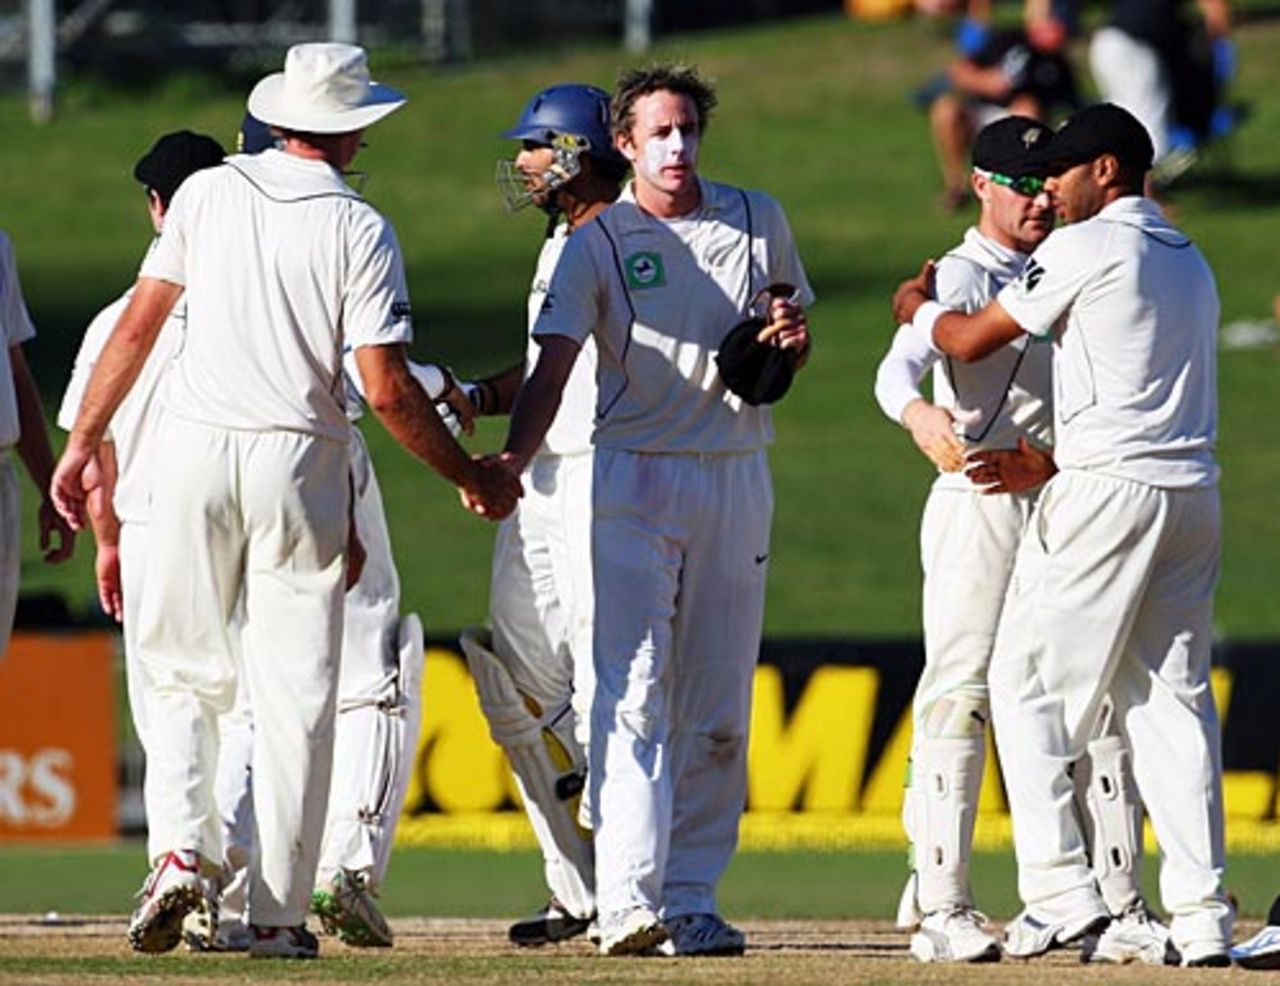 The New Zealand players shake hands after the match, New Zealand v India, 2nd Test, Napier, 5th day, March 30, 2009